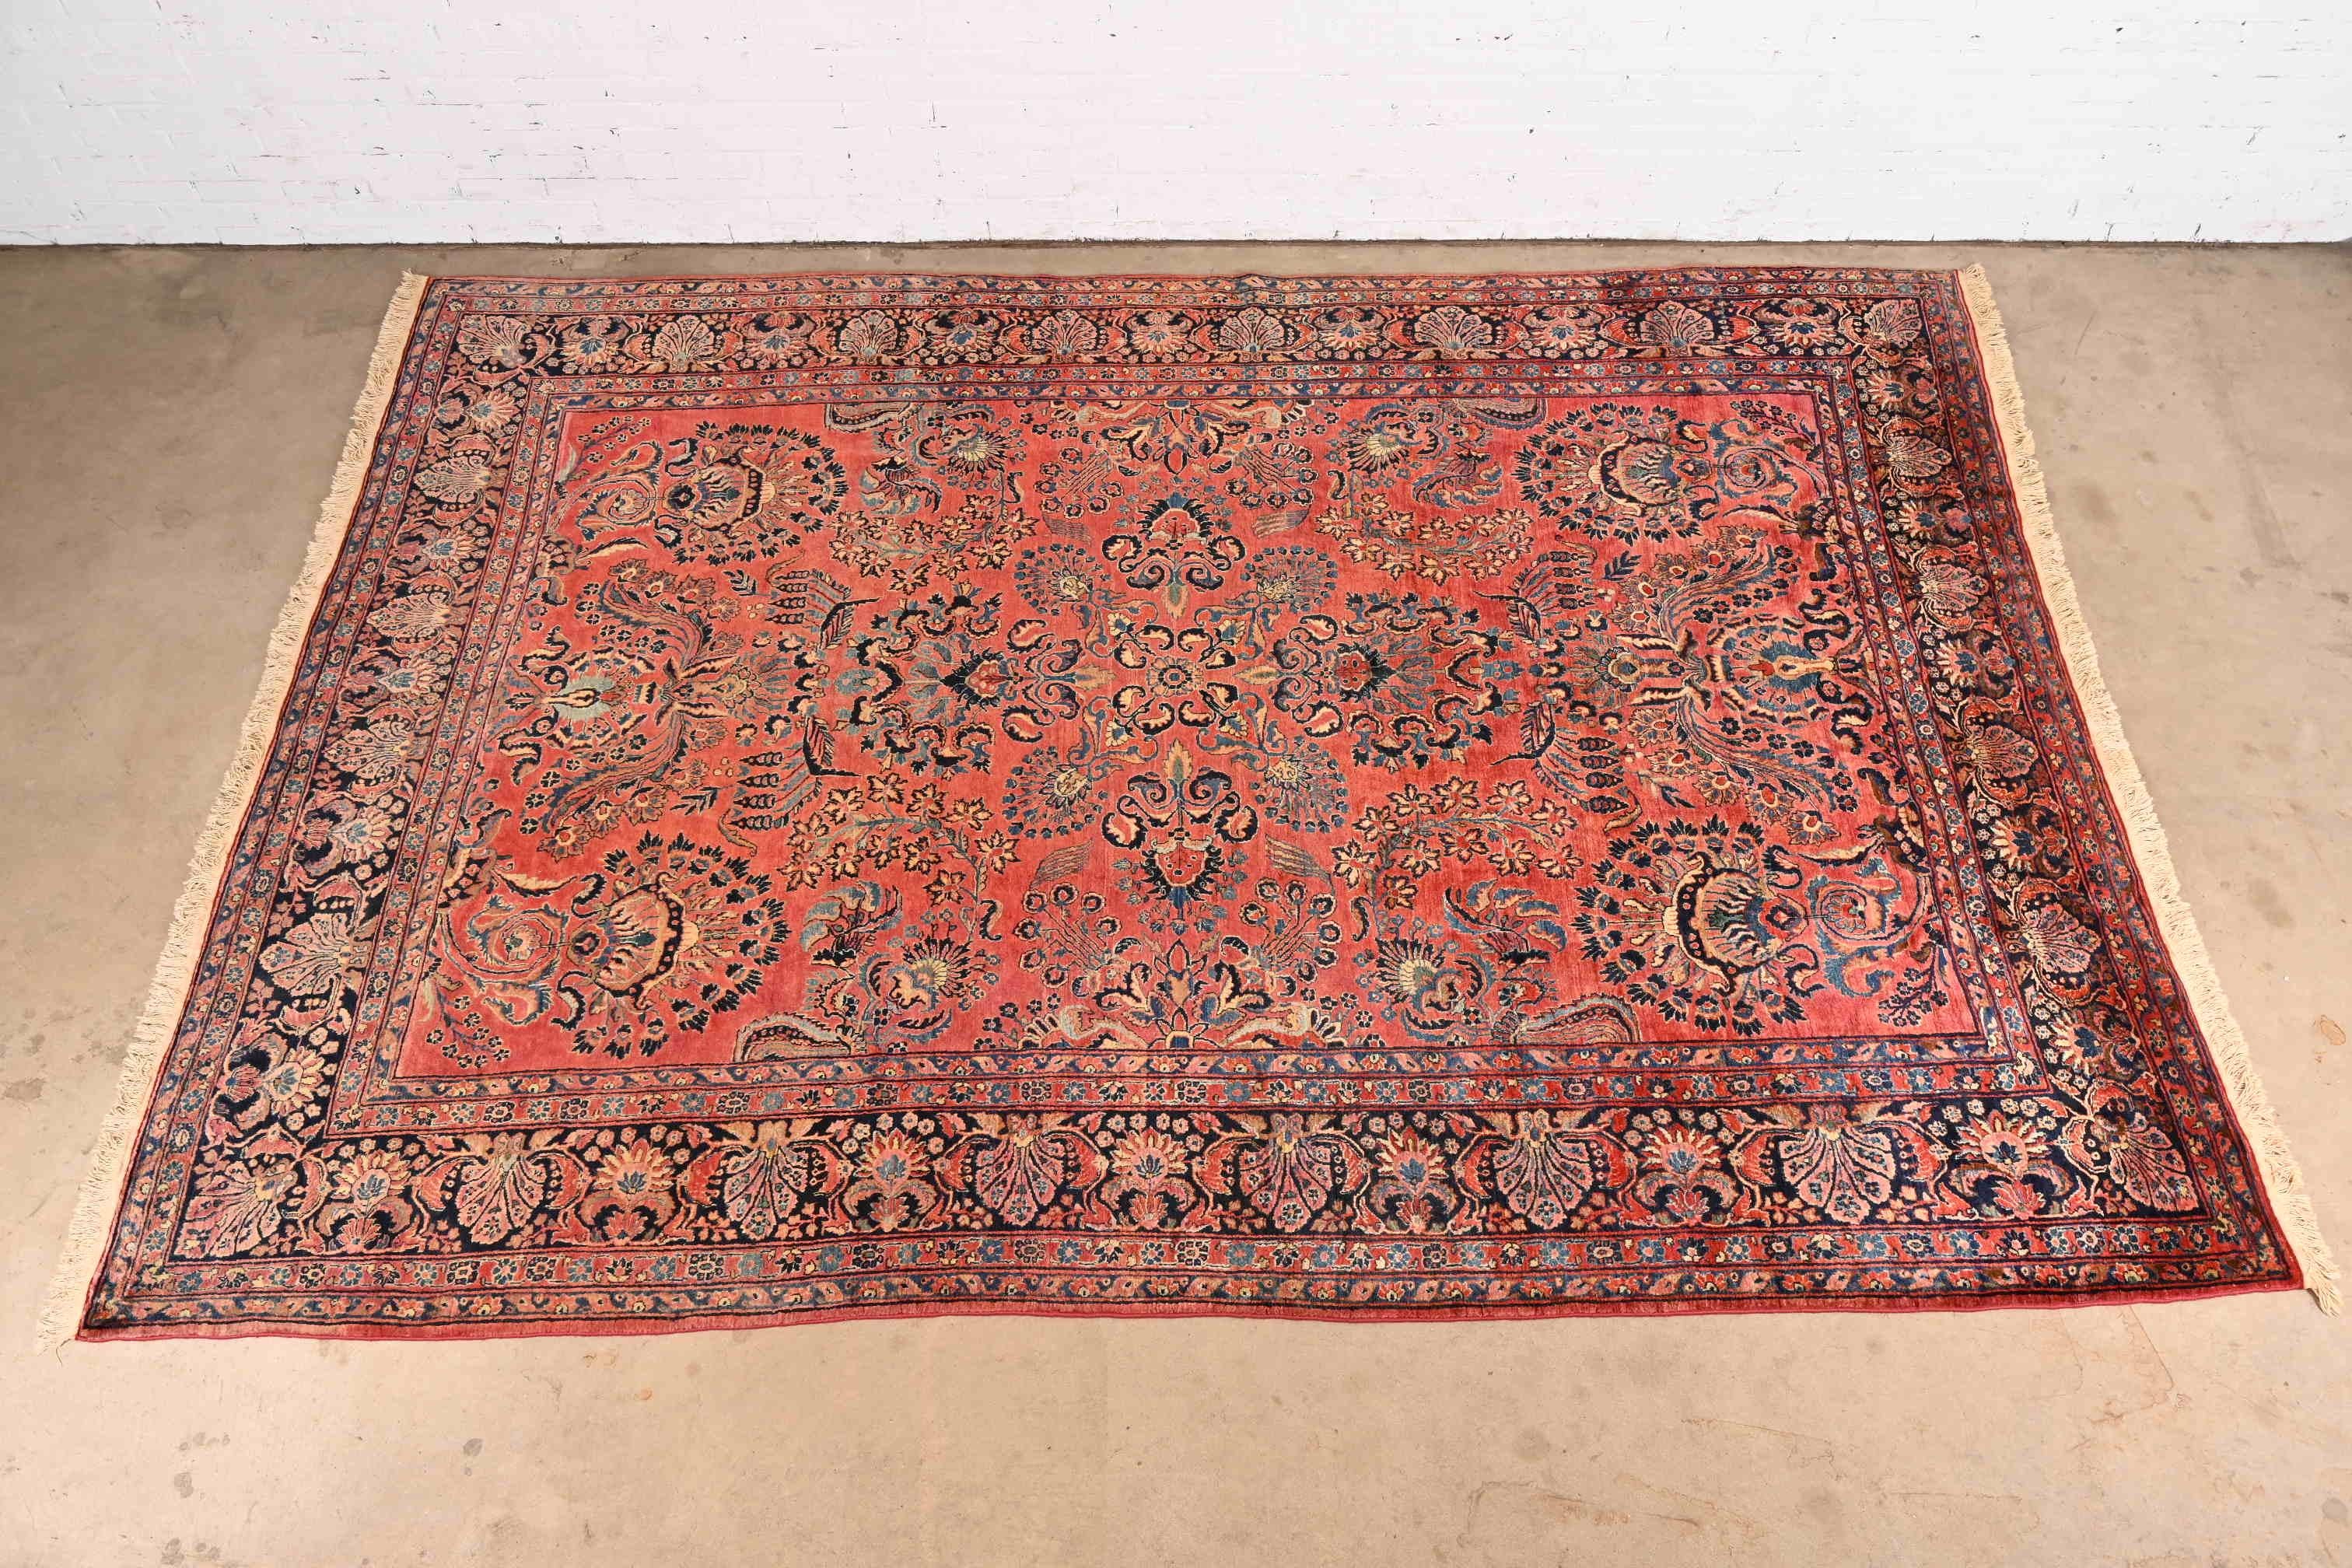 A gorgeous antique hand-knotted Persian Sarouk room size rug

Circa 1930s

Features beautiful traditional floral sprays and bouquets, with predominant colors in red, blue, and ivory.

Measures: 8